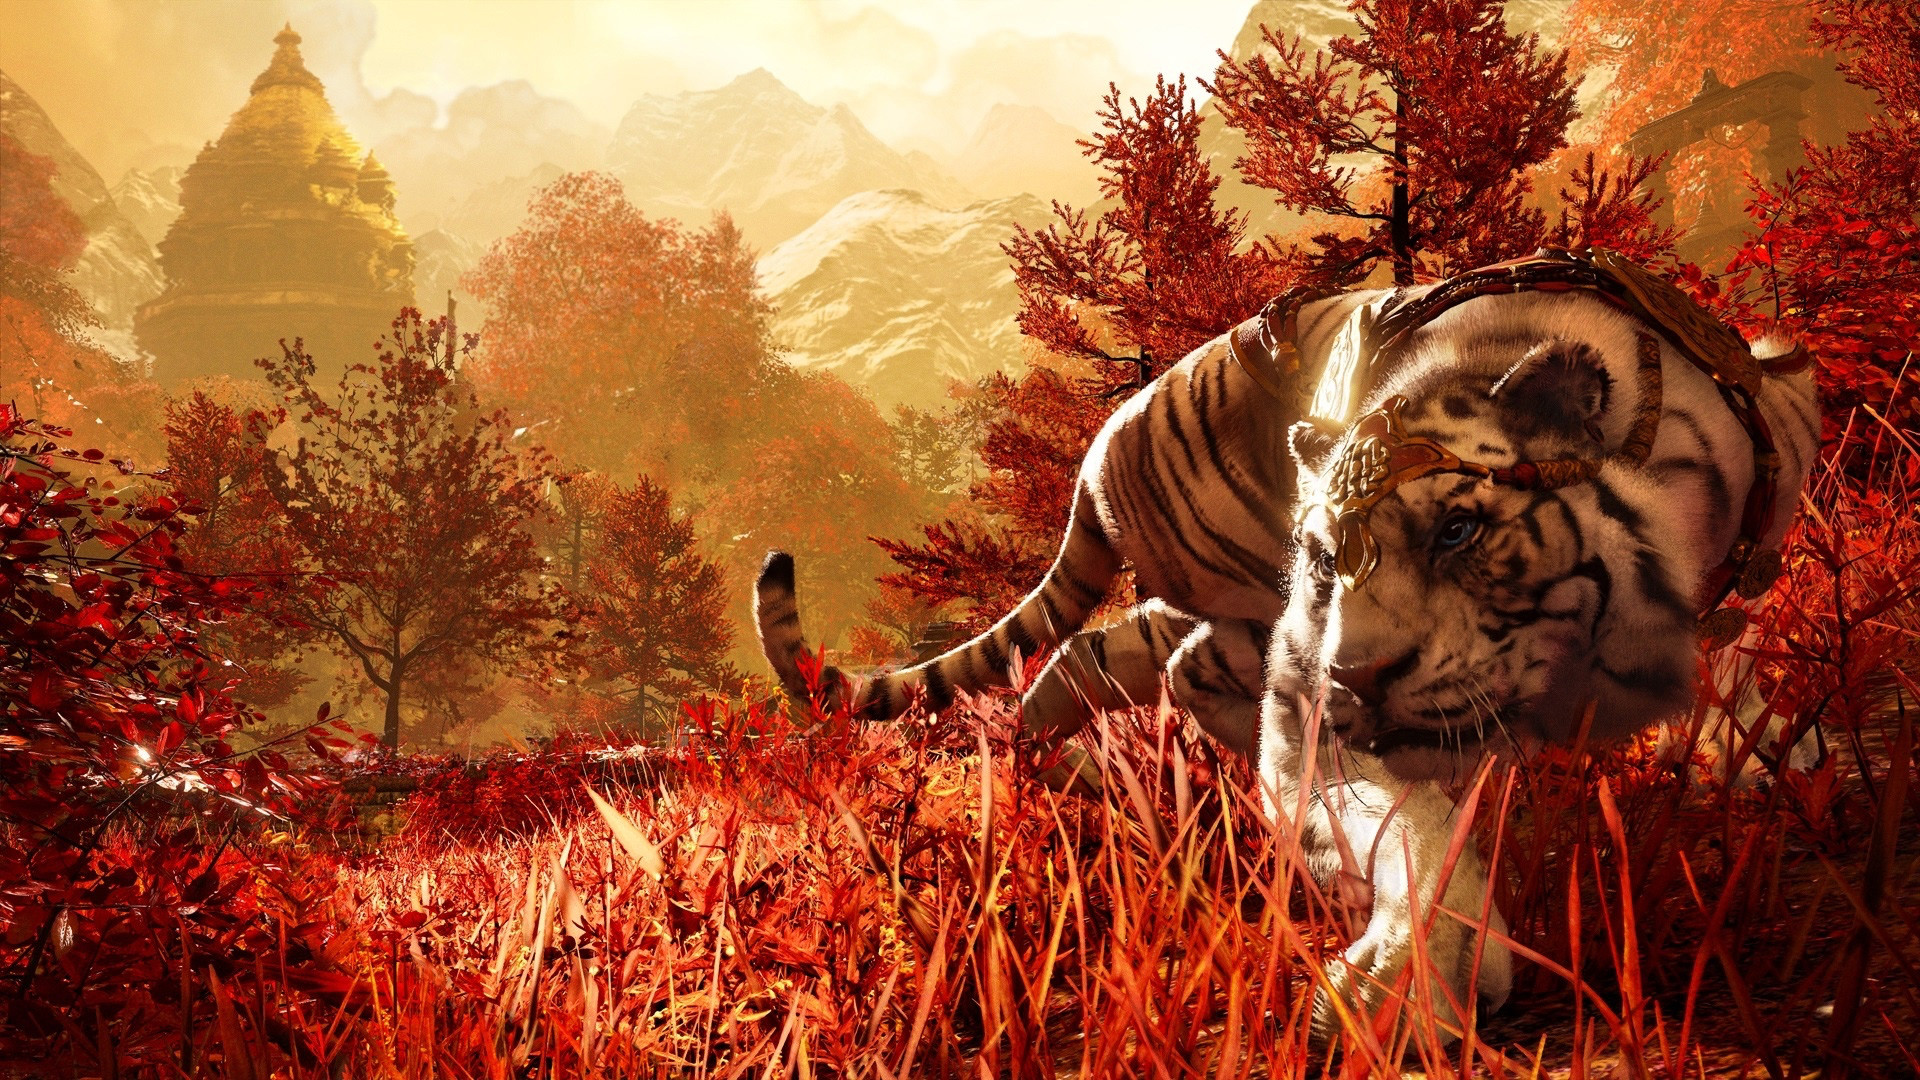 1920x1080 DOWNLOAD WALLPAPER 1. Select the image above to view the wallpaper full  screen. 2. Press the PlayStation 4 screen capture button on the controller. Far  Cry ...